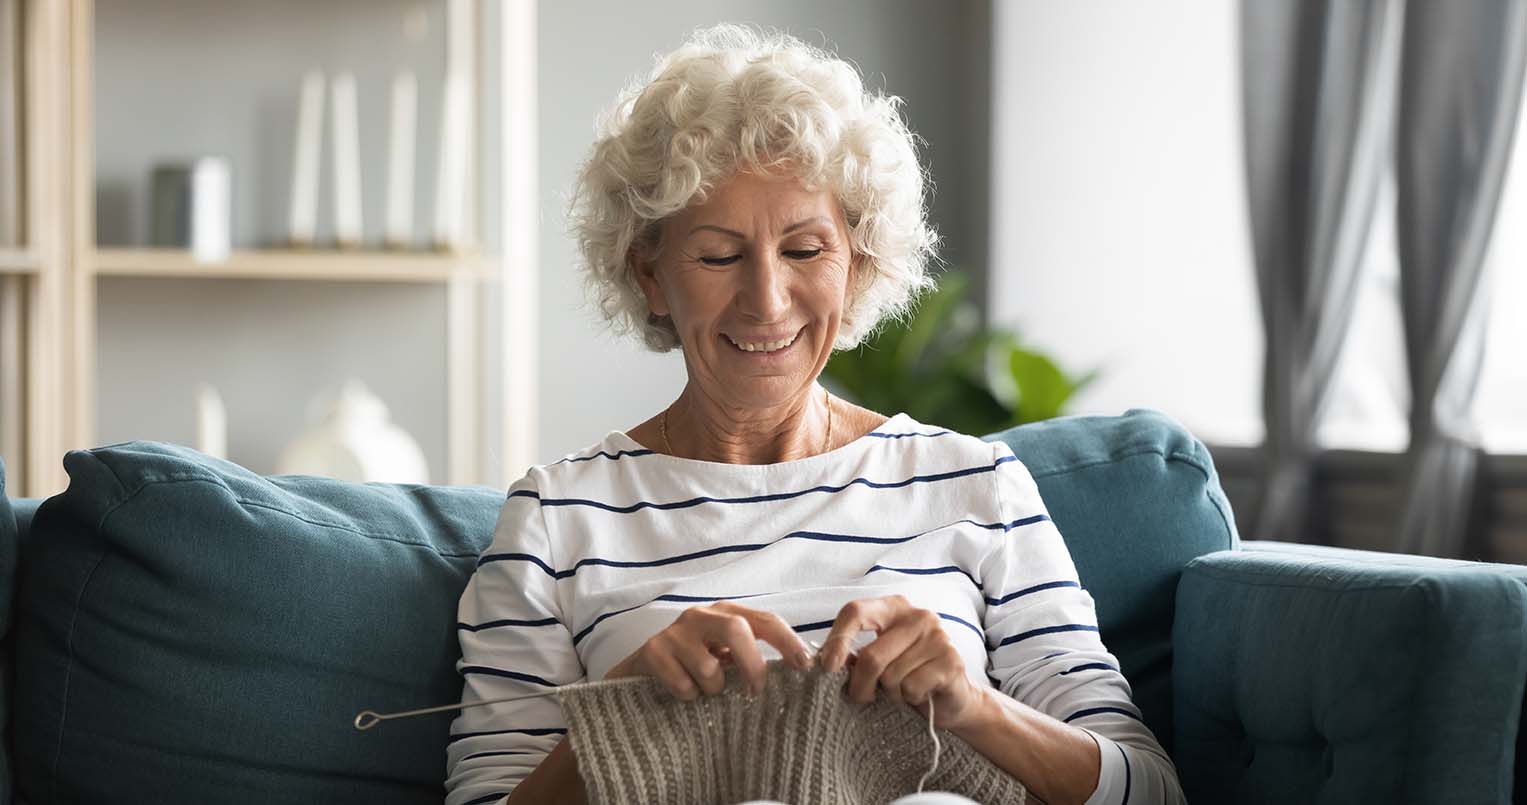 smiling older woman sitting on a blue couch knitting